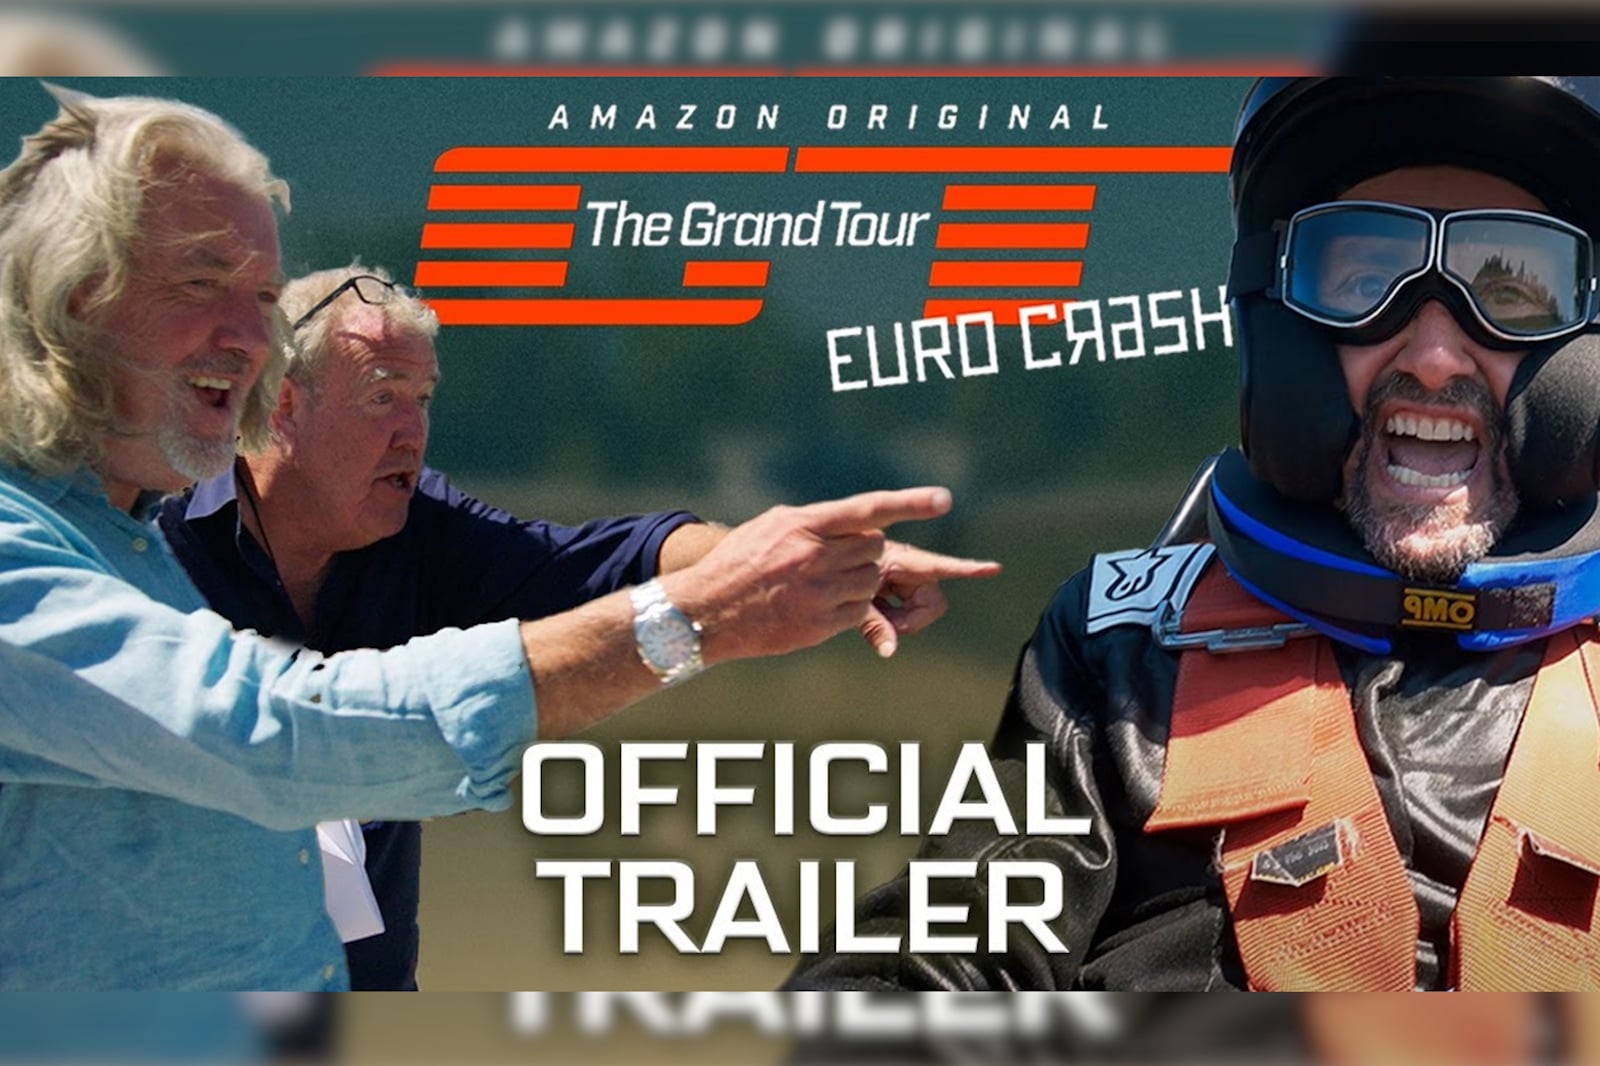 The Grand Tour Goes Behind Iron Curtain In New Eurocrash Special